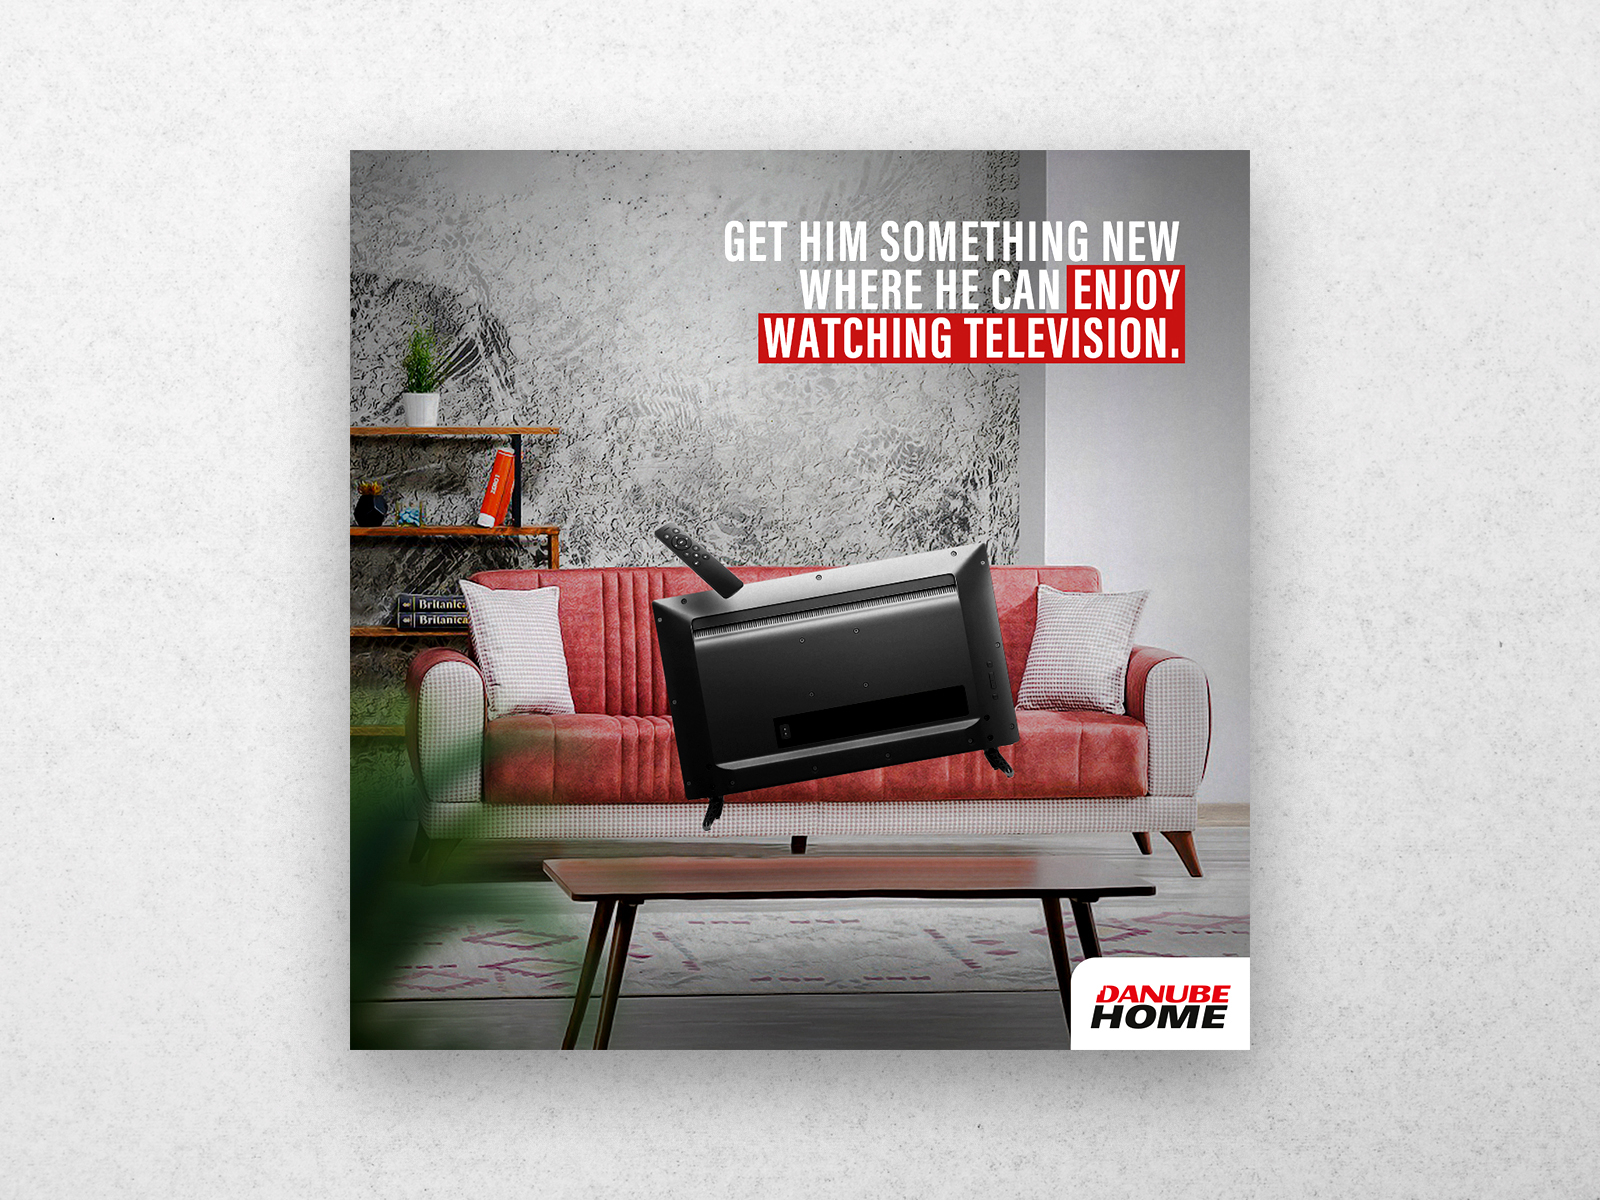 Fathers Day Creative On Furniture By Sridhar Bokka On Dribbble 1980